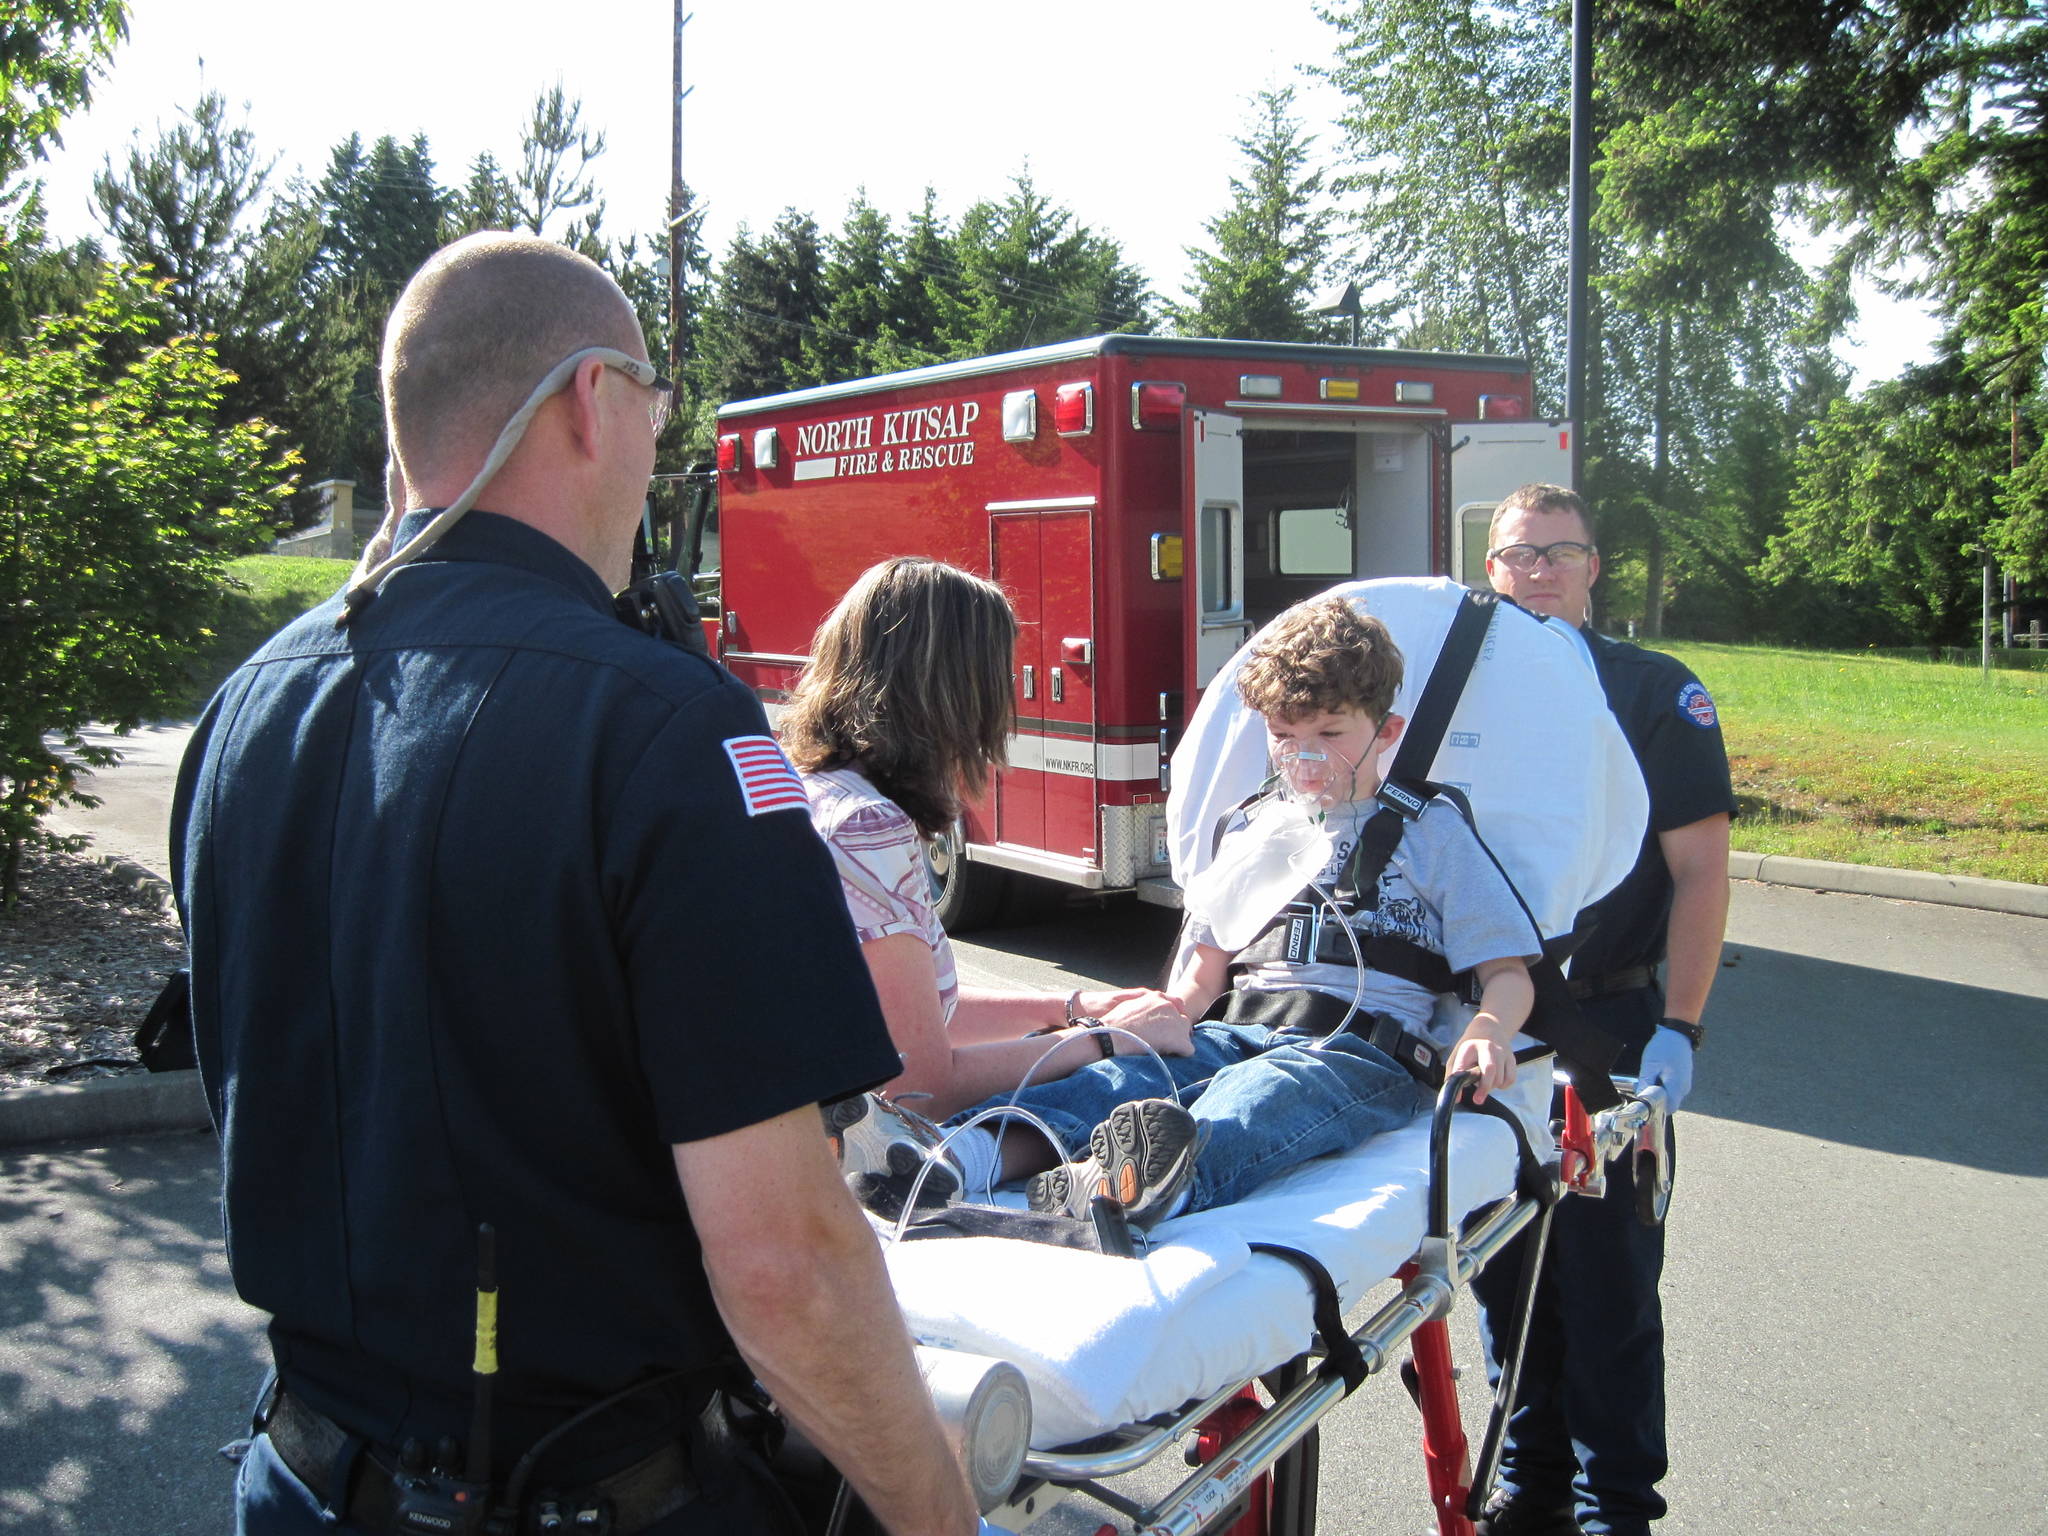 <em>National Emergency Medical Services Week is May 19-25, 2019. All of NKF&R’s response personnel are dual-qualified as firefighters and emergency medical technicians. As shown here, crews regularly train on a variety of situations to ensure that they’re ready for the next emergency call. </em>Photo courtesy North Kitsap Fire & Rescue